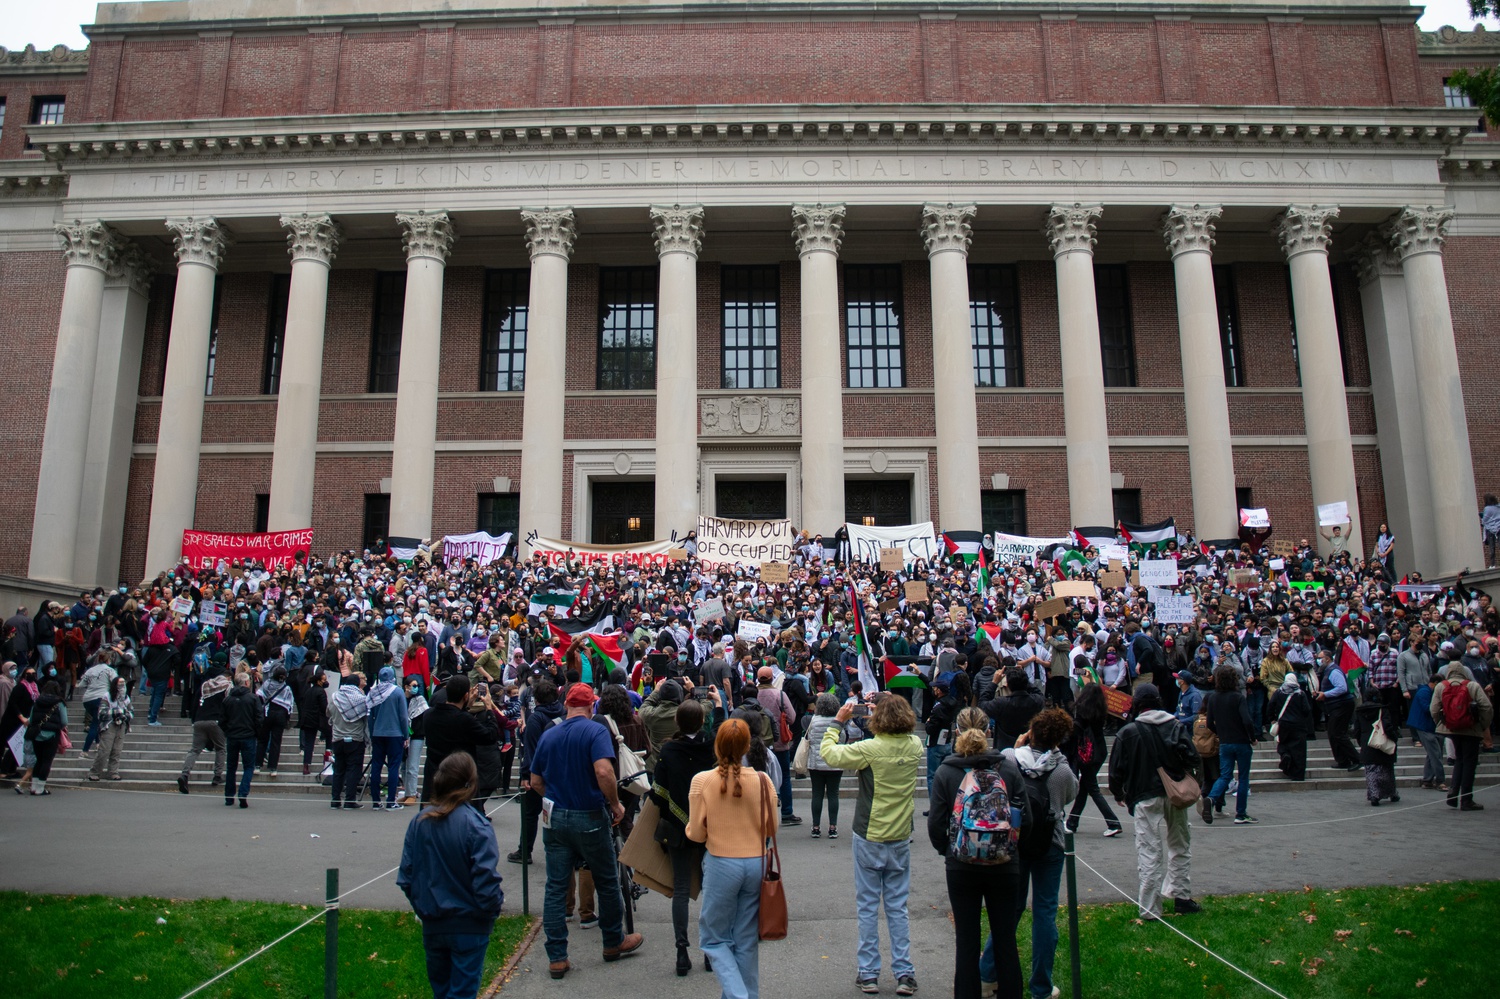 Rally attendees posed for a photo on the steps of Widener Library.